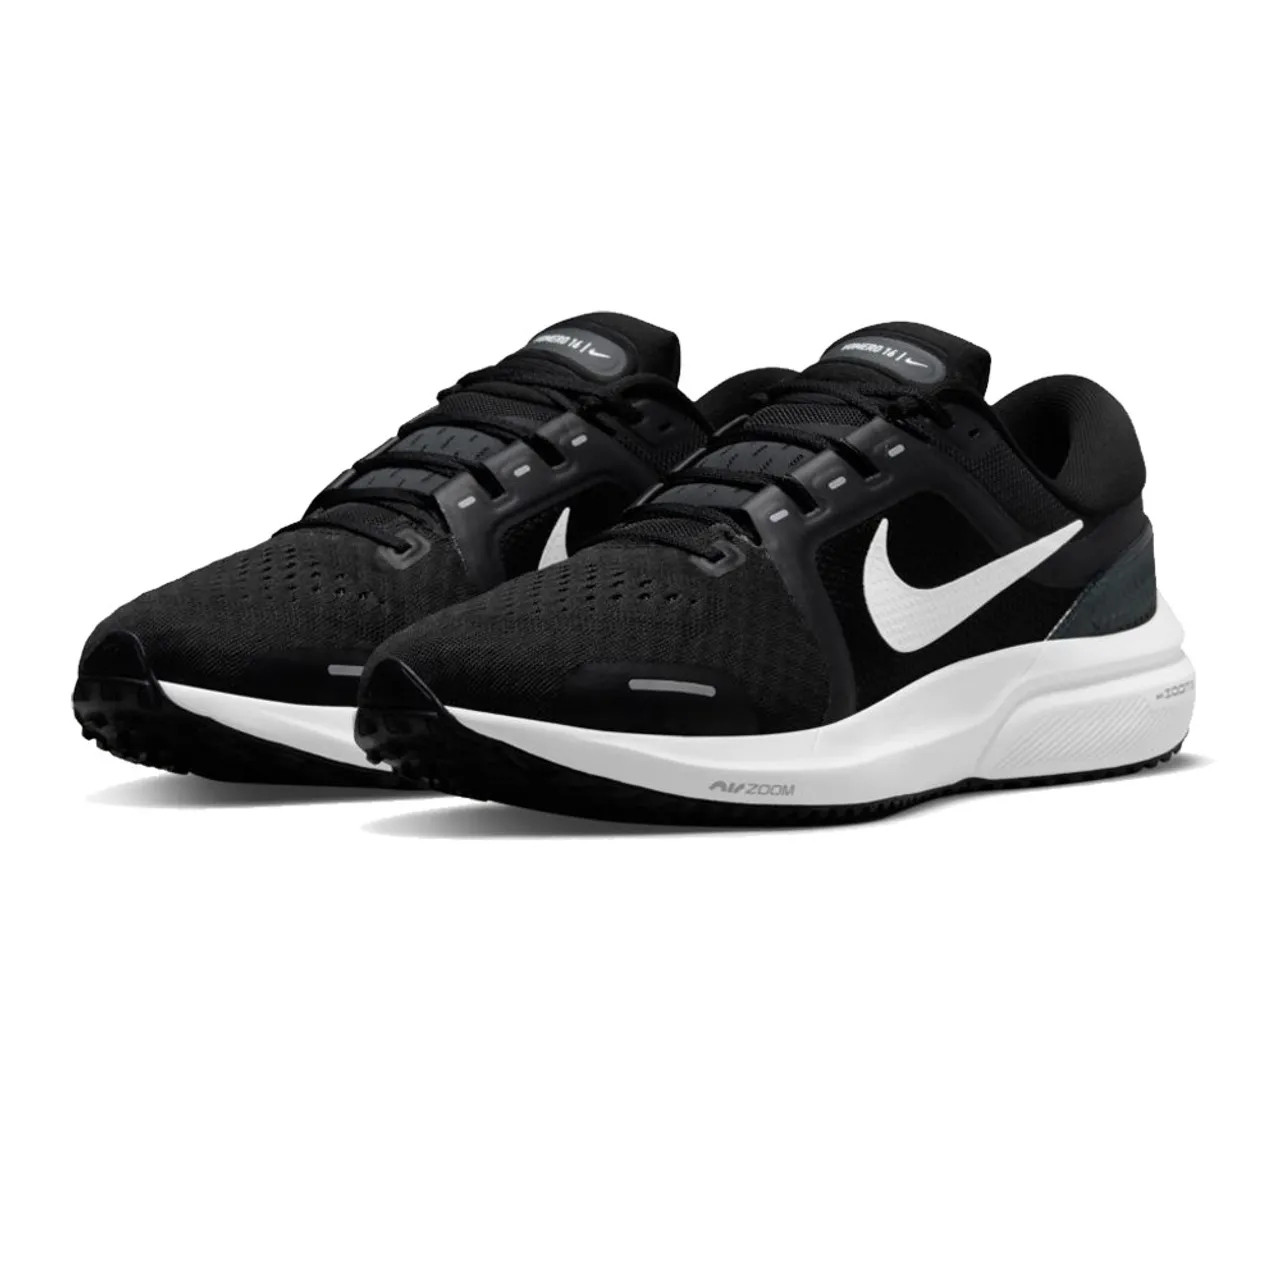 Nike Air Zoom Vomero 16 Running Shoes